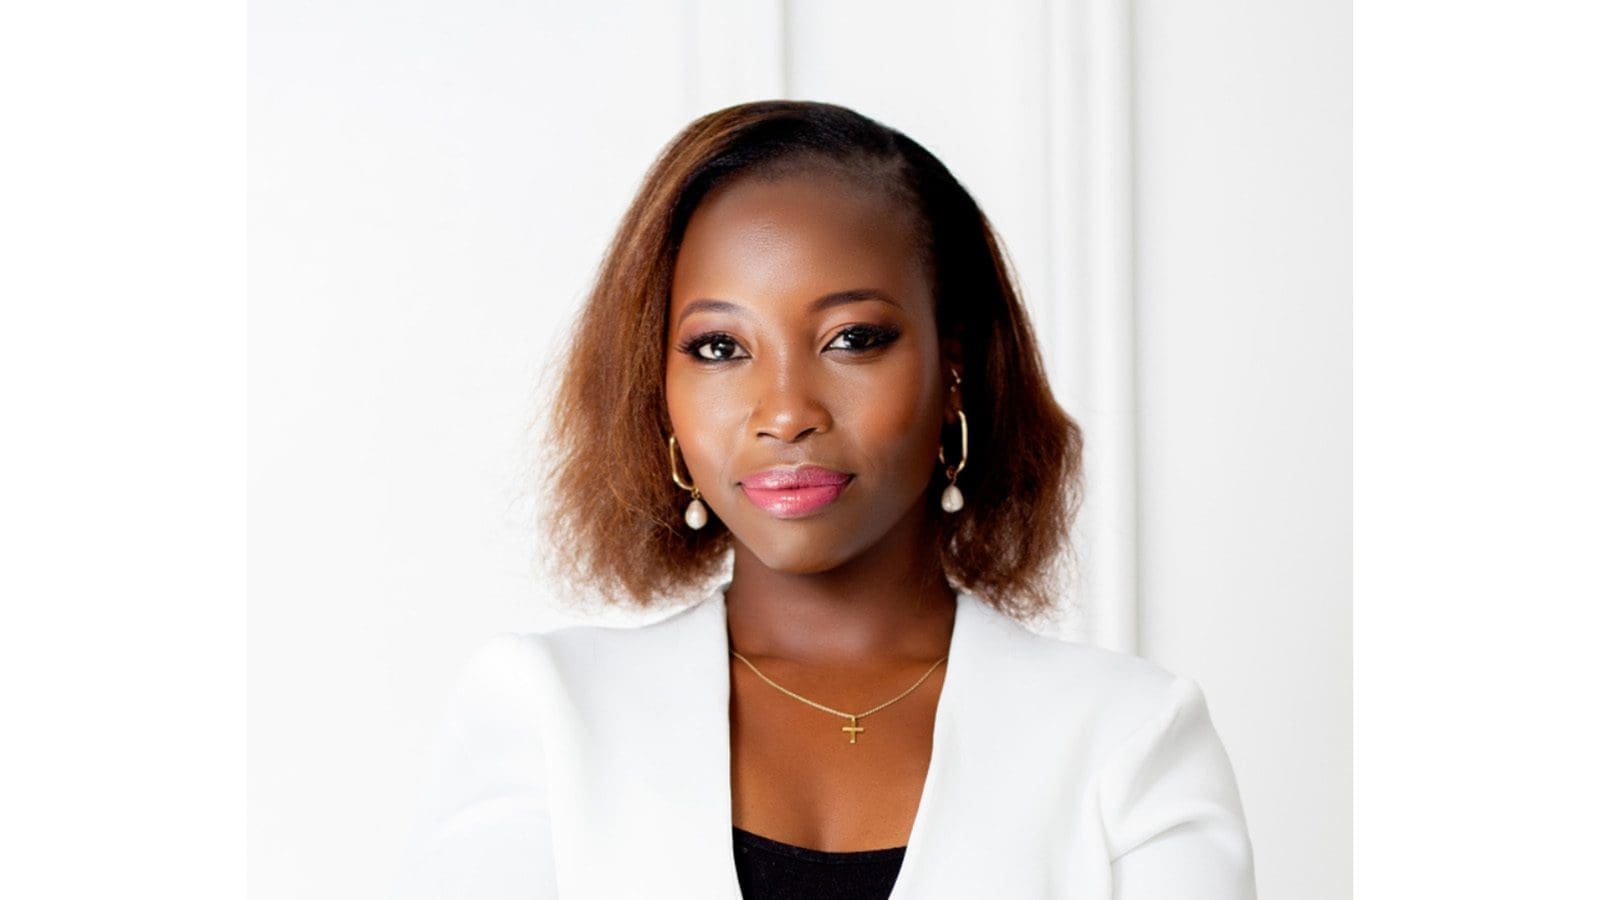 Uber Eats Kenya appoints Wangui Mbugua as General Manager to steer its growth